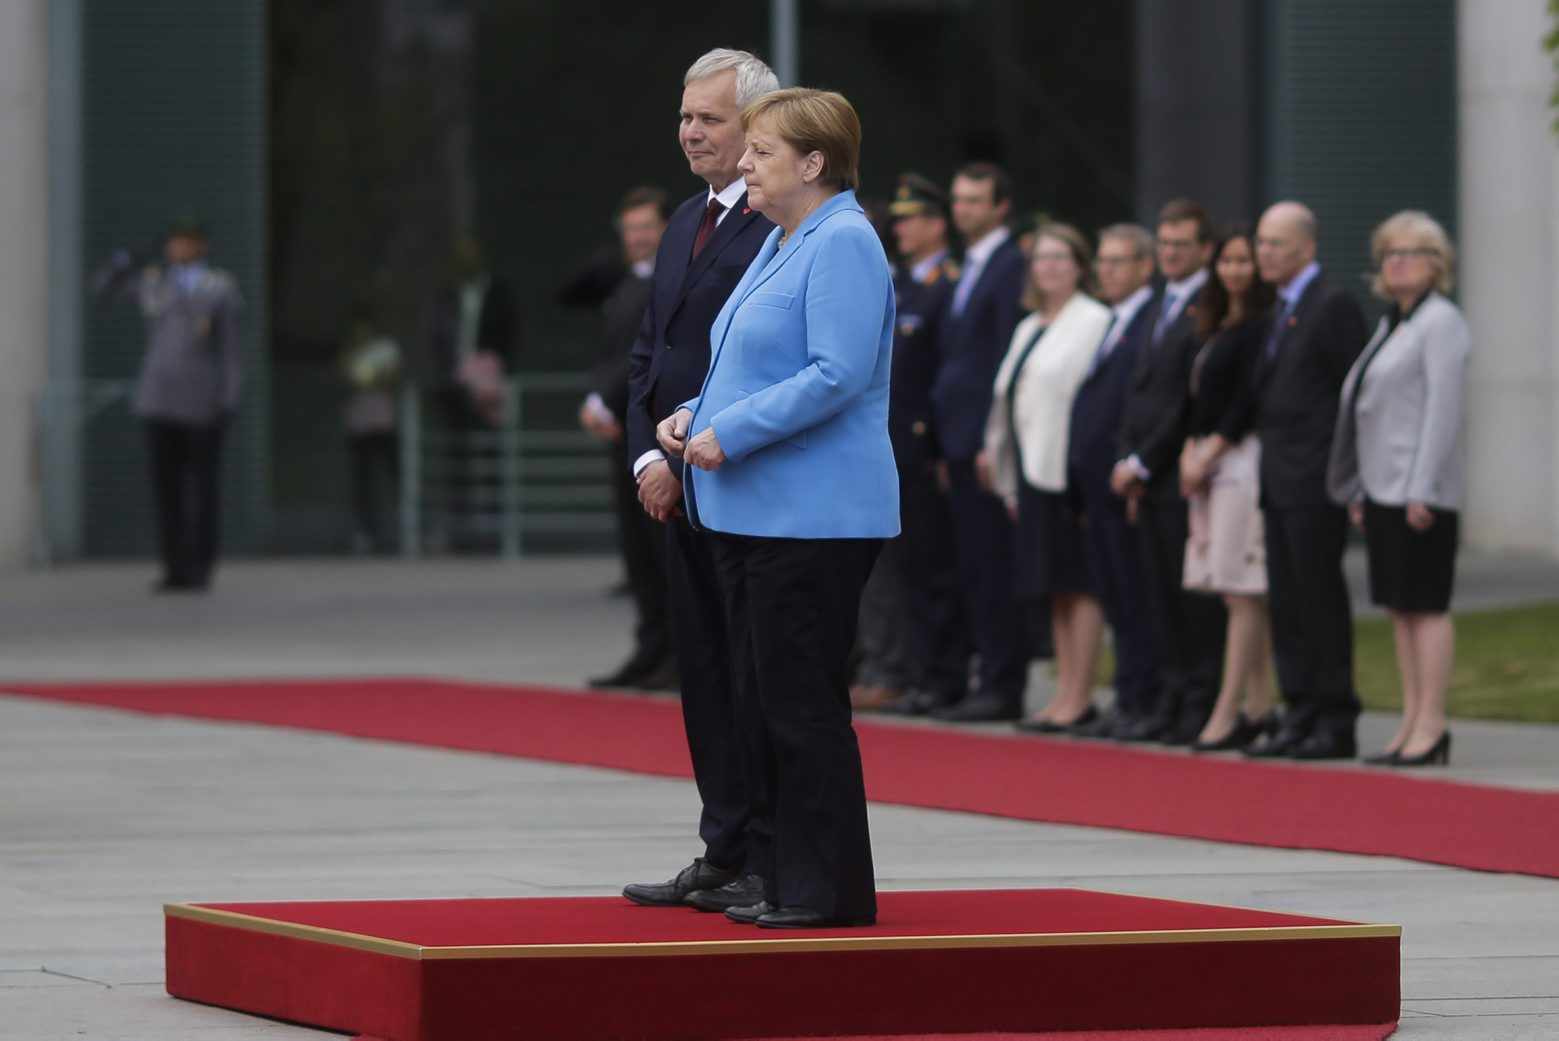 German Chancellor Angela Merkel and Prime Minister of Finland Antti Rinne listen to the national anthems at the chancellery in Berlin, Germany, Wednesday, July 10, 2019. Merkel's body shook visibly as she stood alongside the Finnish prime minister and listen to the national anthems during the welcoming ceremony at the chancellery. (AP Photo/Markus Schreiber) Germany Finland Merkel